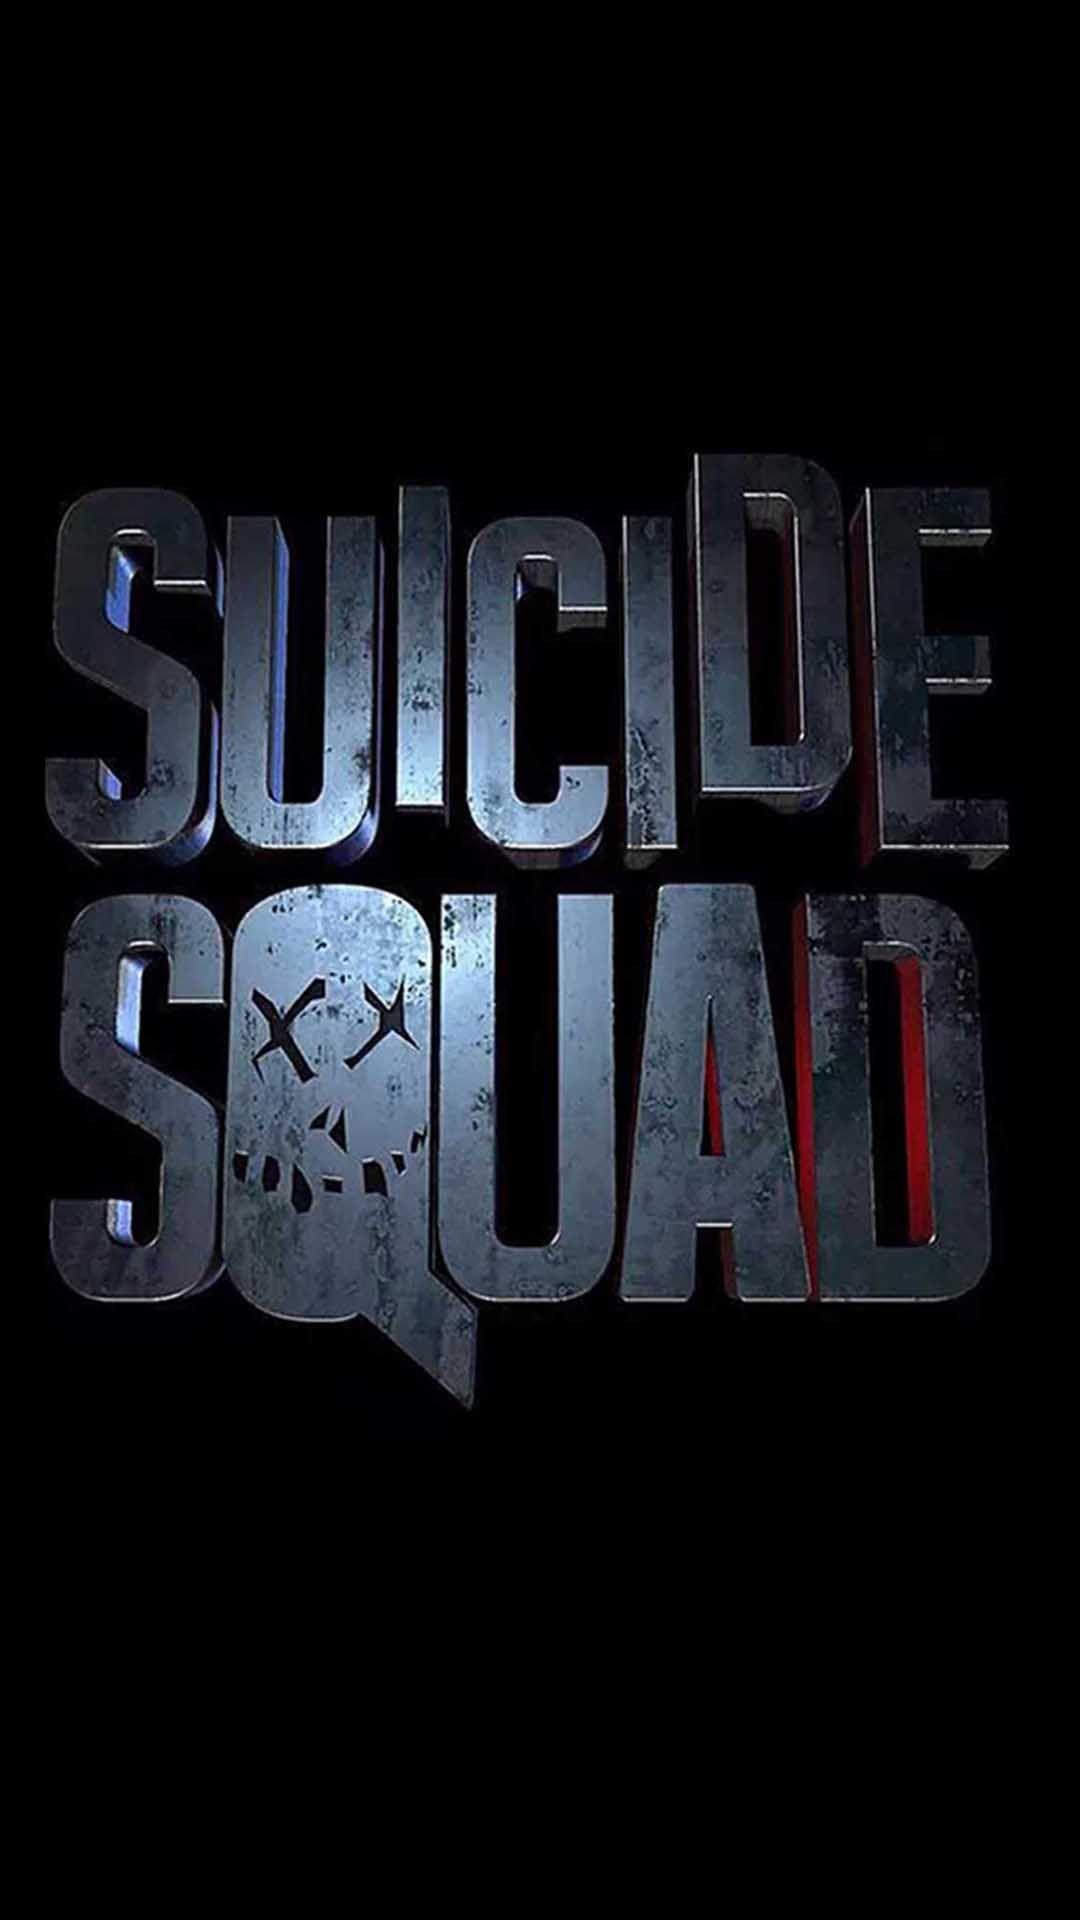 Suicide Squad Wallpaper for iPhone Pro Max, X, 6